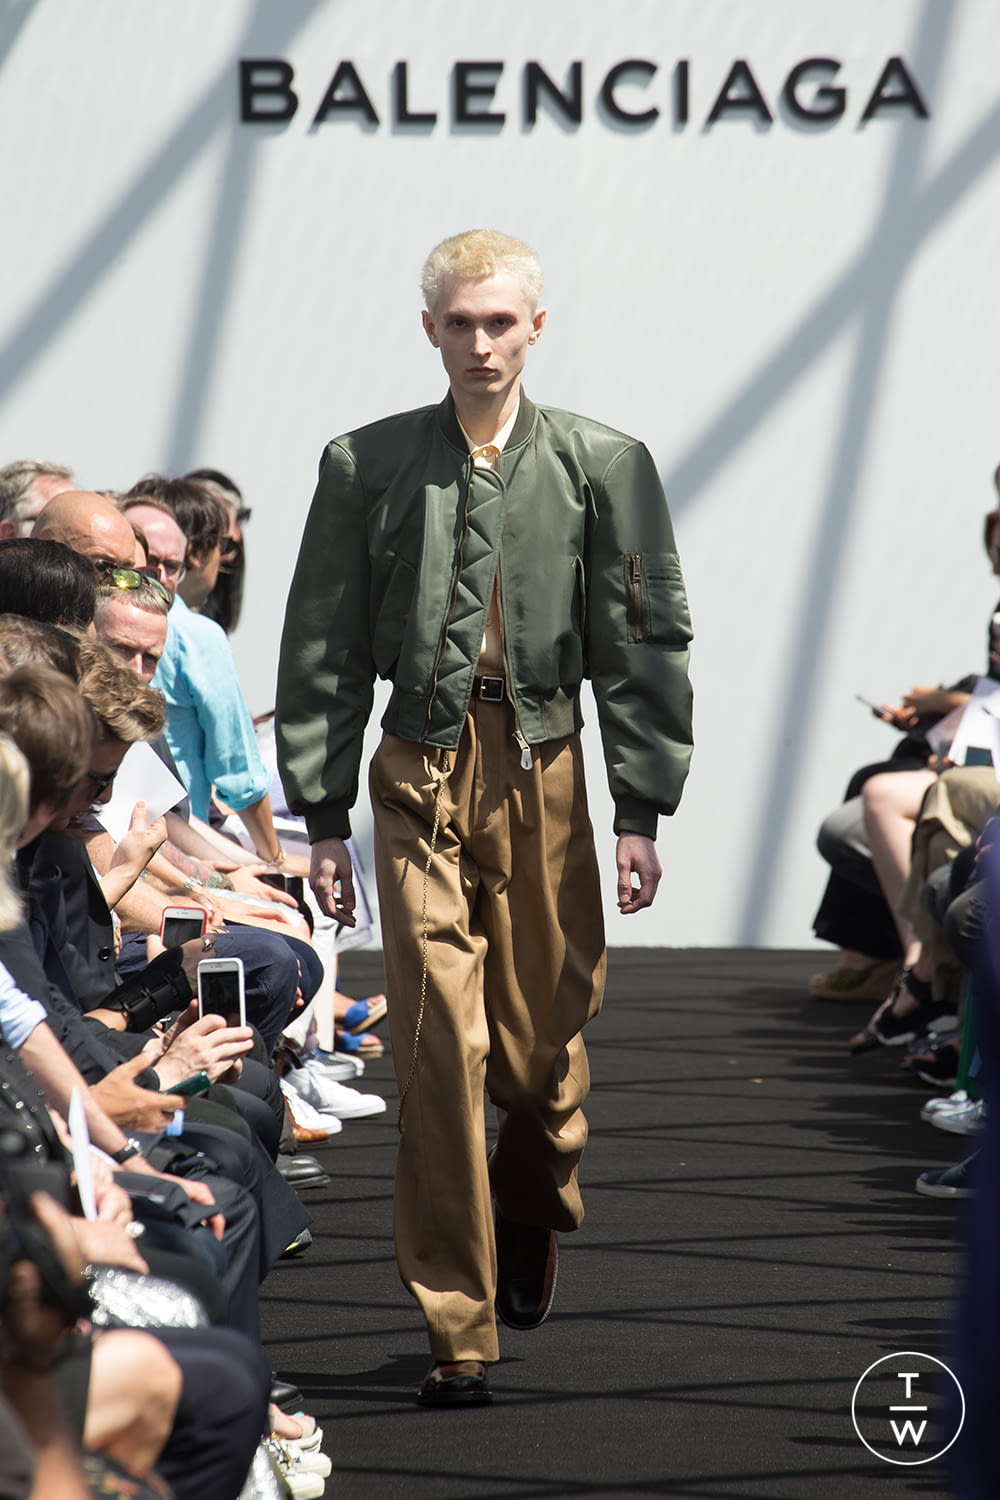 Blive ved Anmeldelse Stræbe Balenciaga S/S 17 menswear #18 - The Fashion Search Engine - TAGWALK